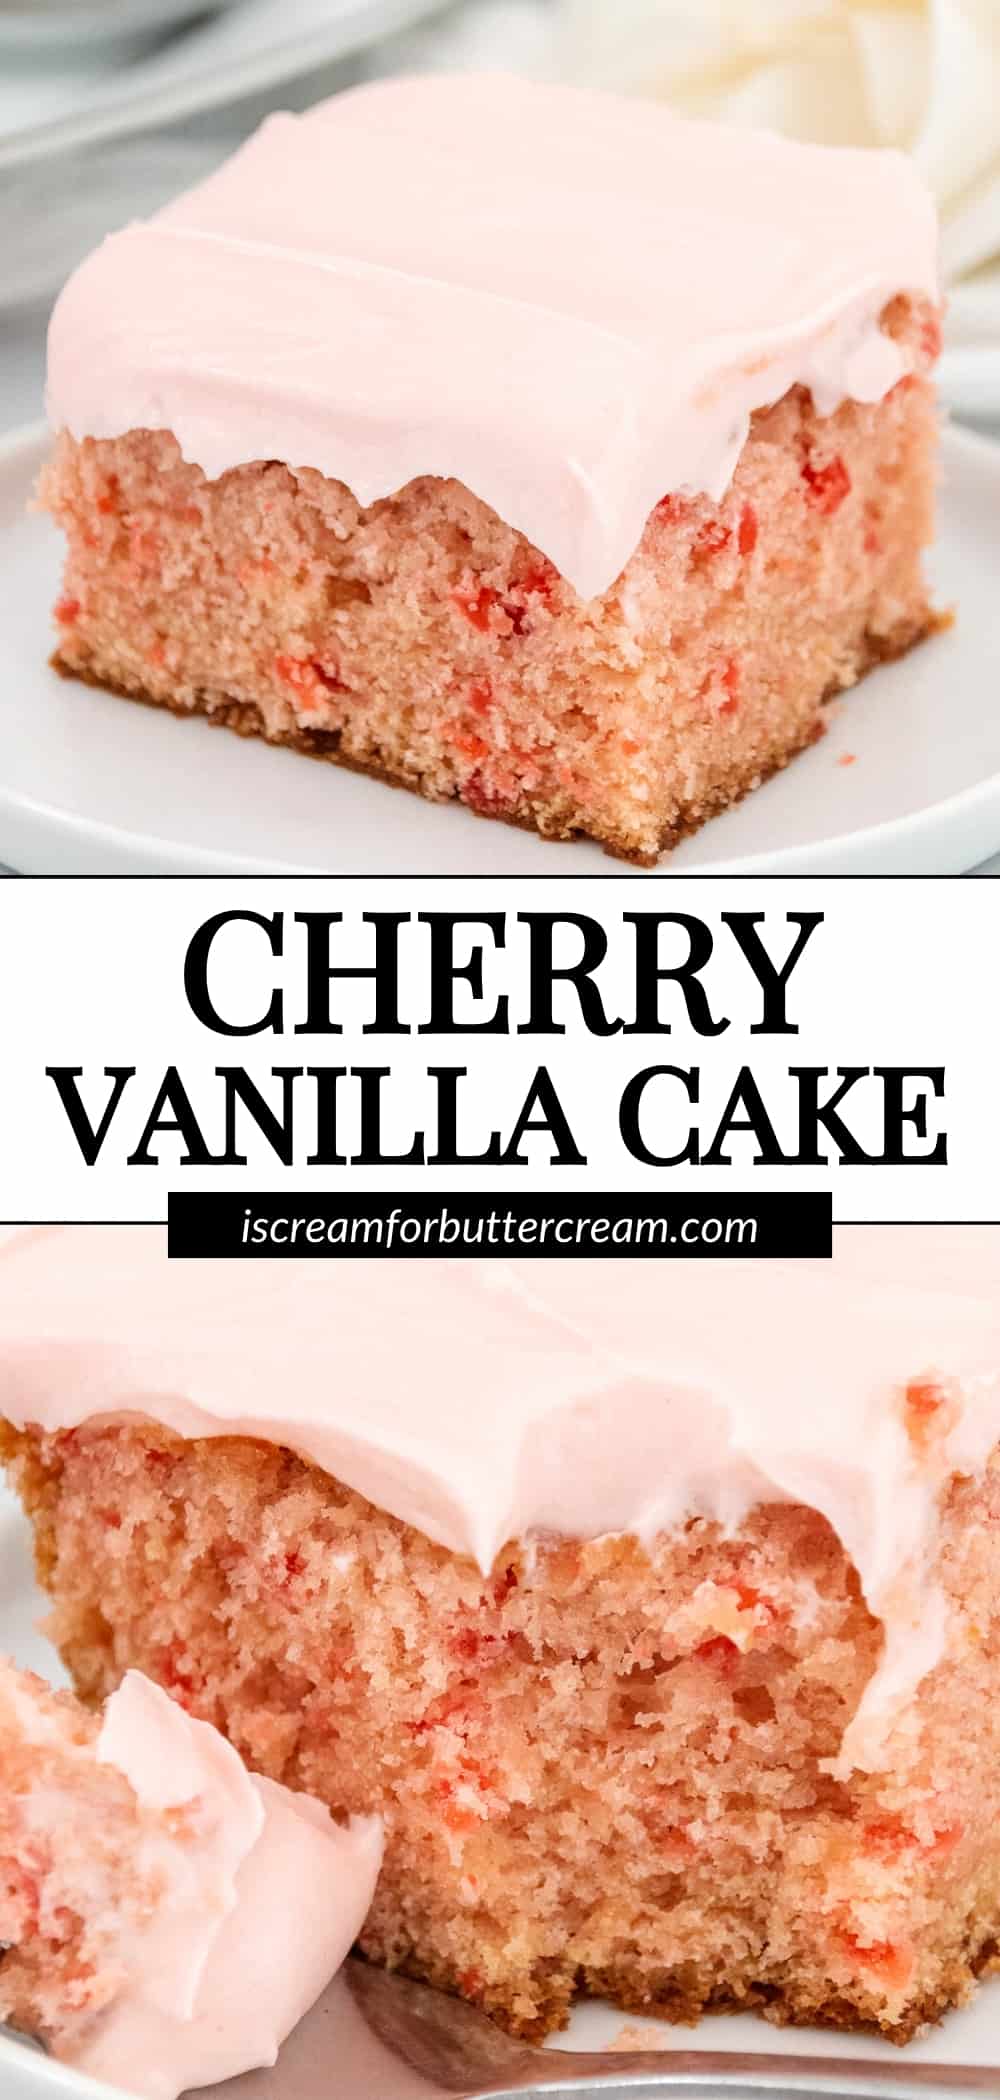 Pinterest graphic with collage of cherry cake with vanilla and frosting on a white plate with text overlay.